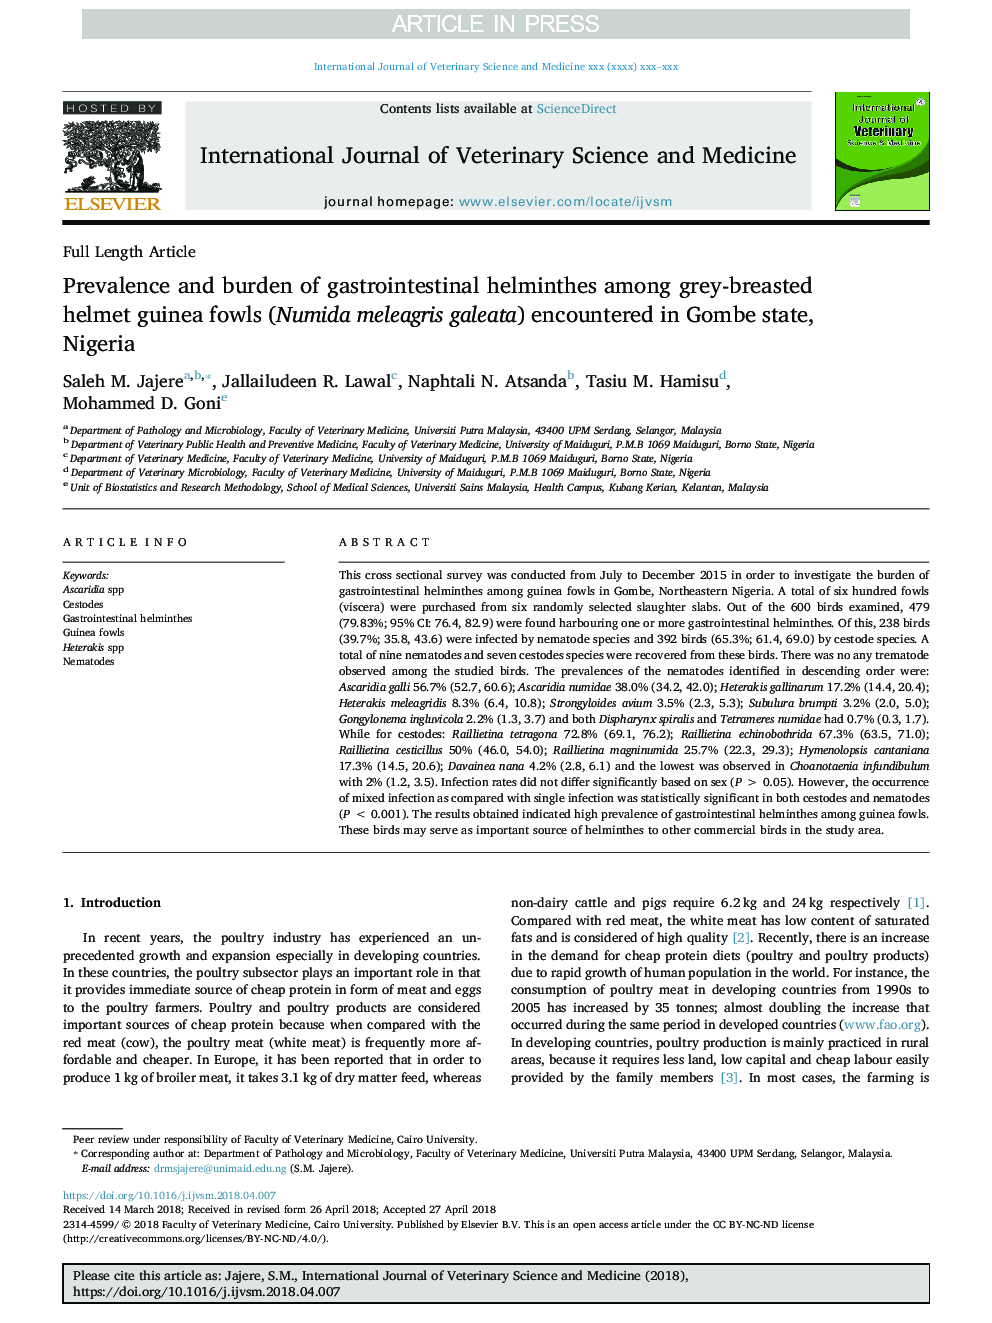 Prevalence and burden of gastrointestinal helminthes among grey-breasted helmet guinea fowls (Numida meleagris galeata) encountered in Gombe state, Nigeria